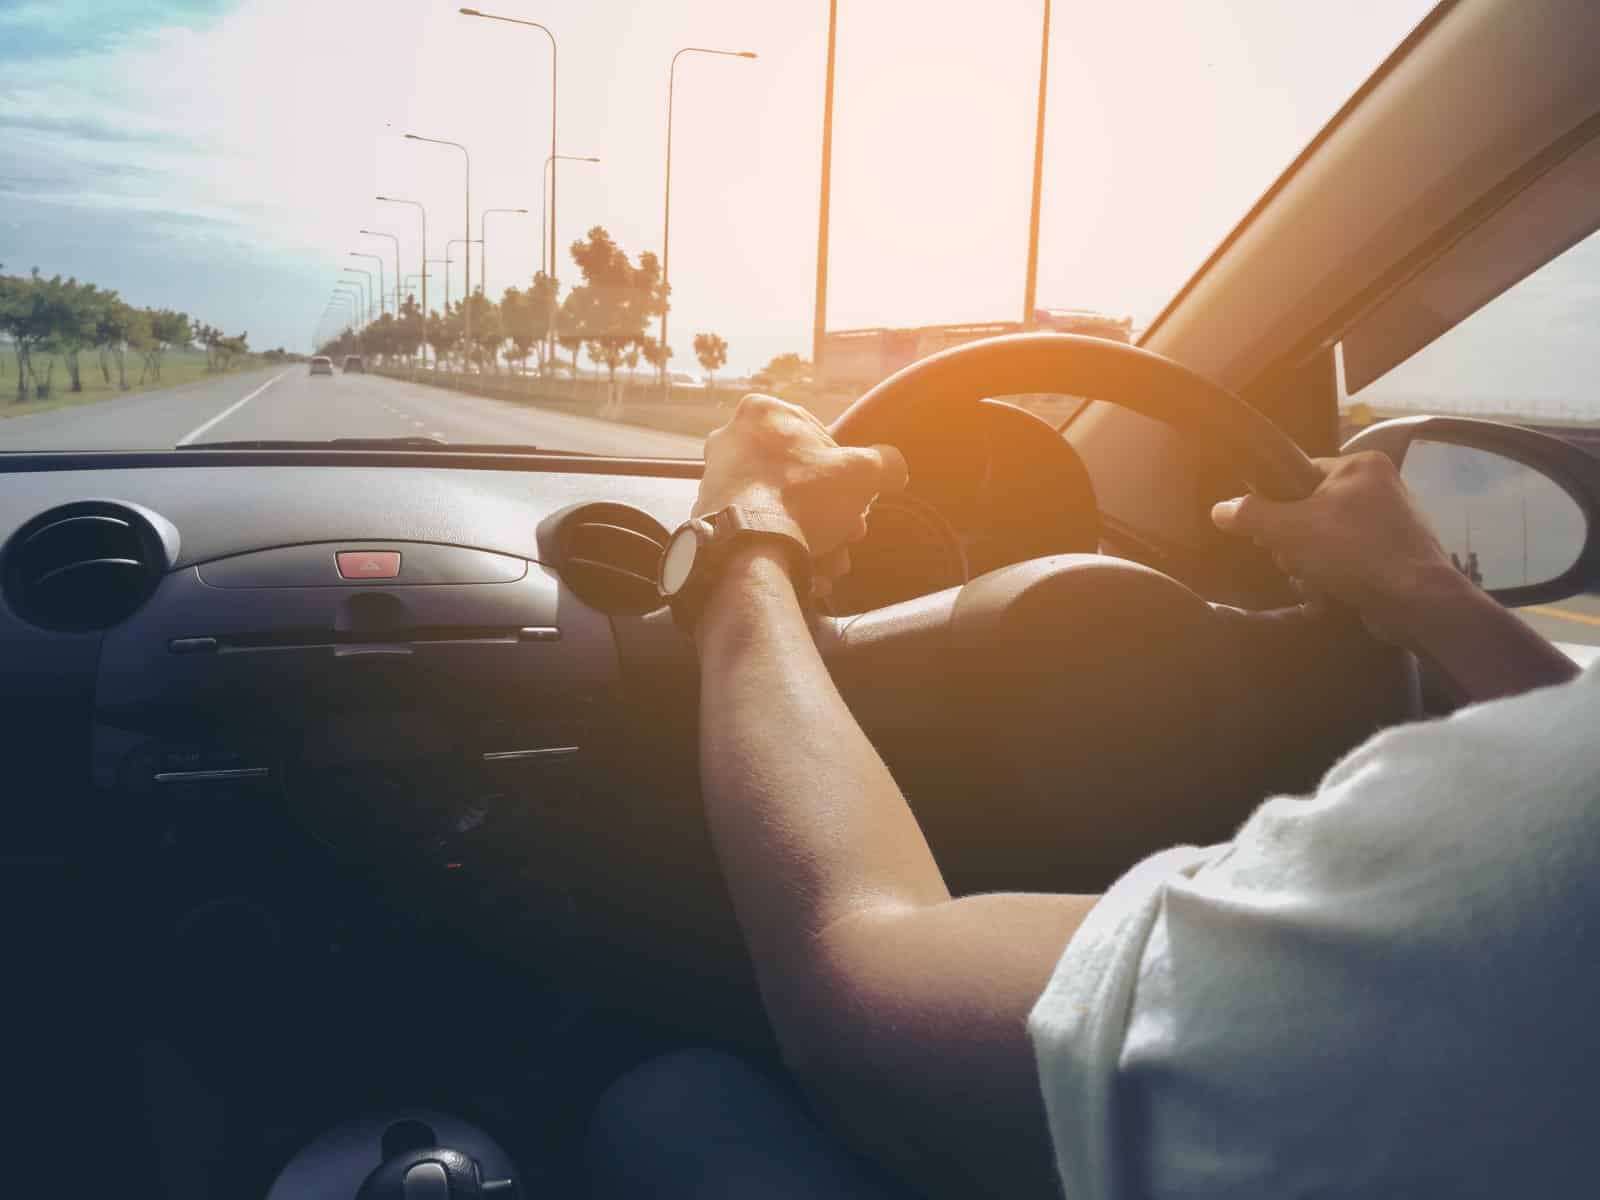 Image Credit: Shutterstock / Lesterman <p>Trackers monitor driving speed and habits. It’s like being the co-pilot from the comfort of your home.</p>